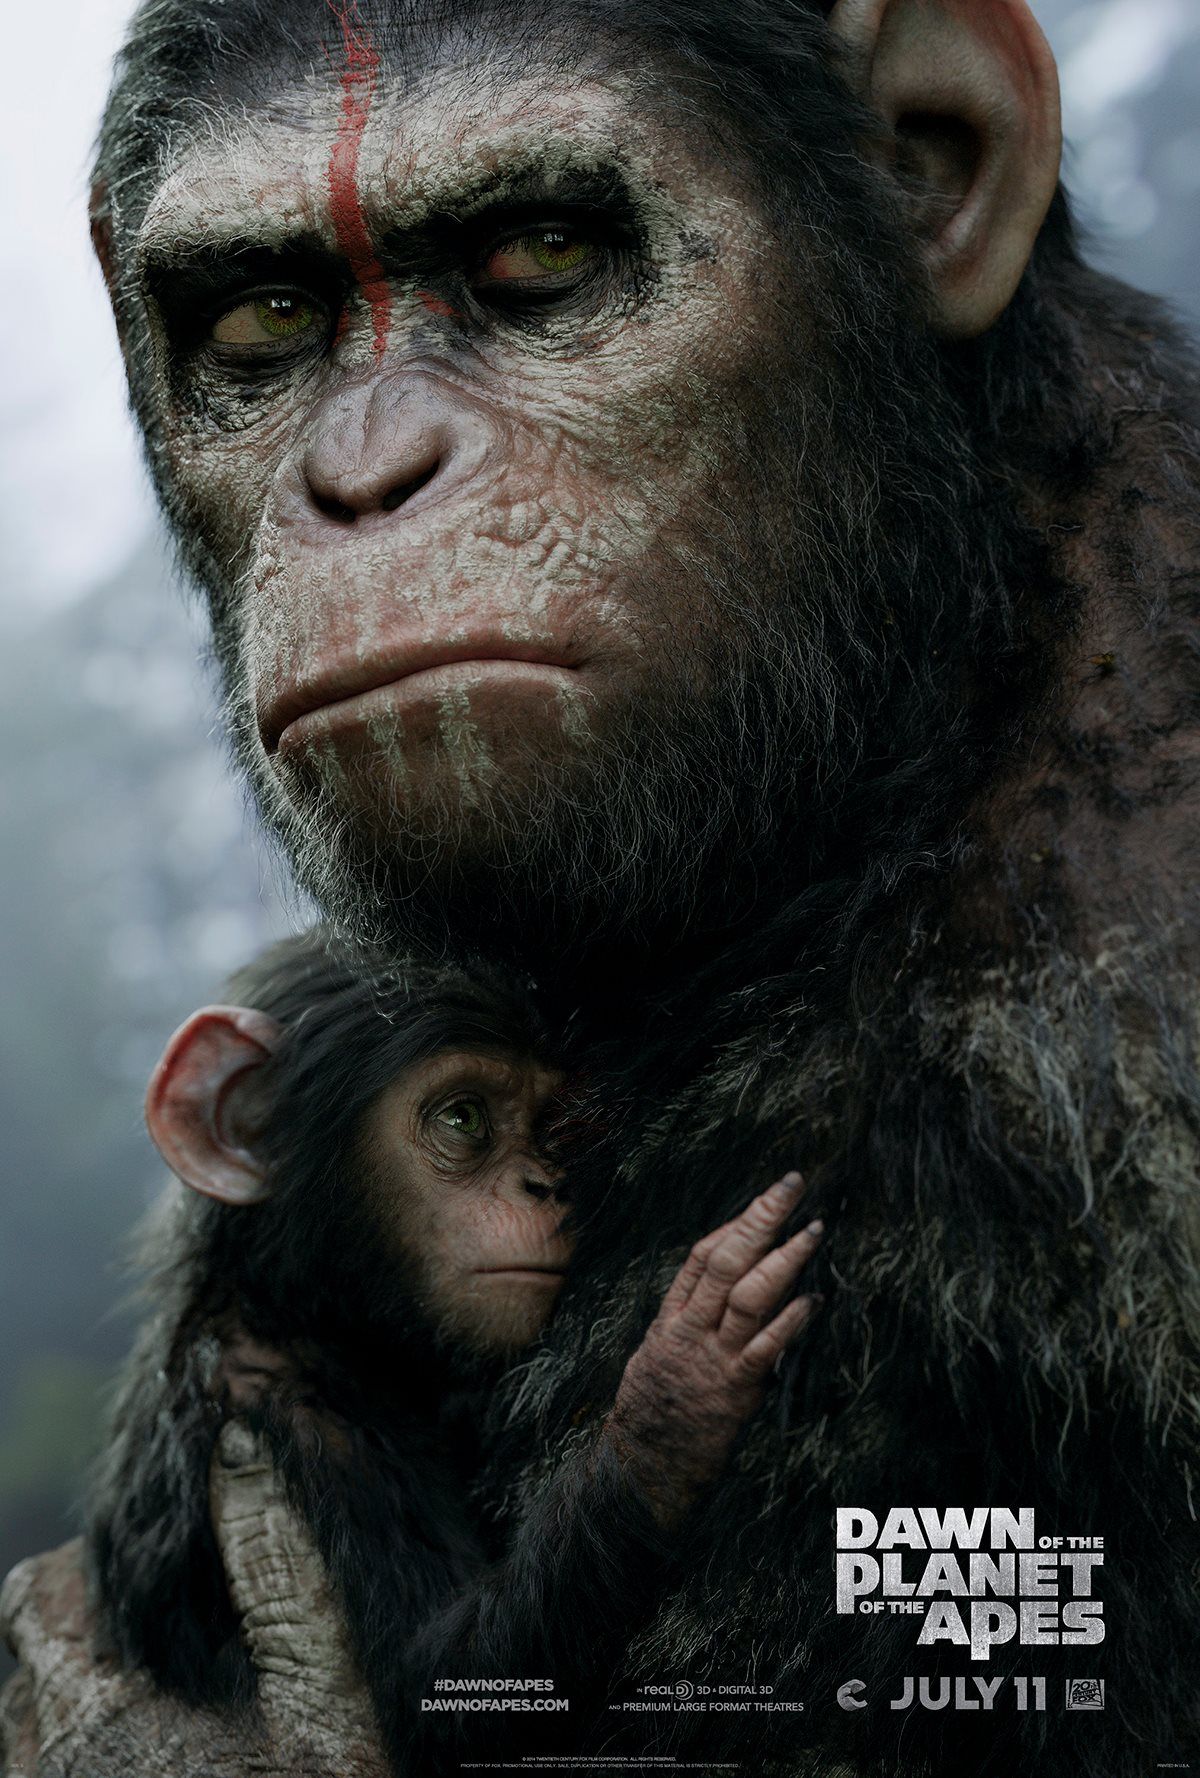 Latest poster for Dawn of the Planet of the Apes